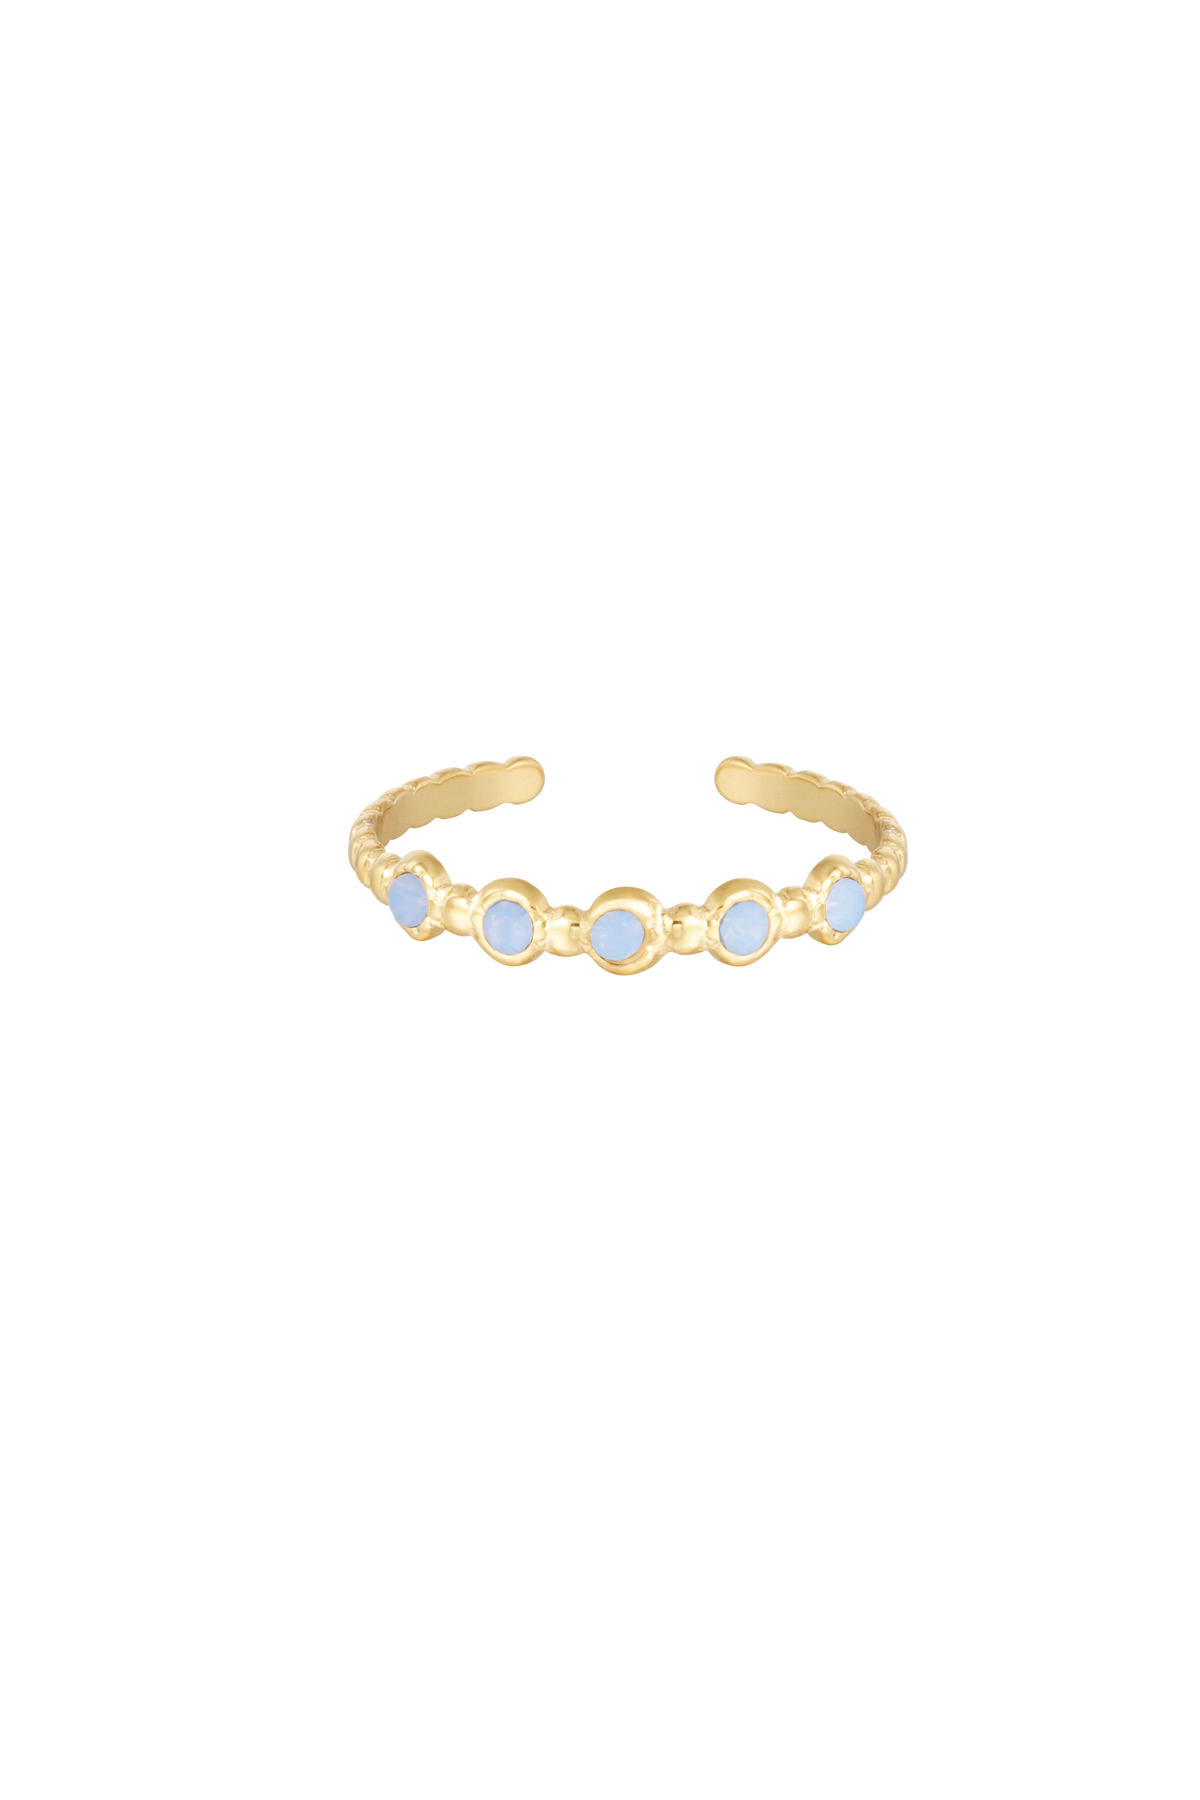 Ring stones - gold/blue 